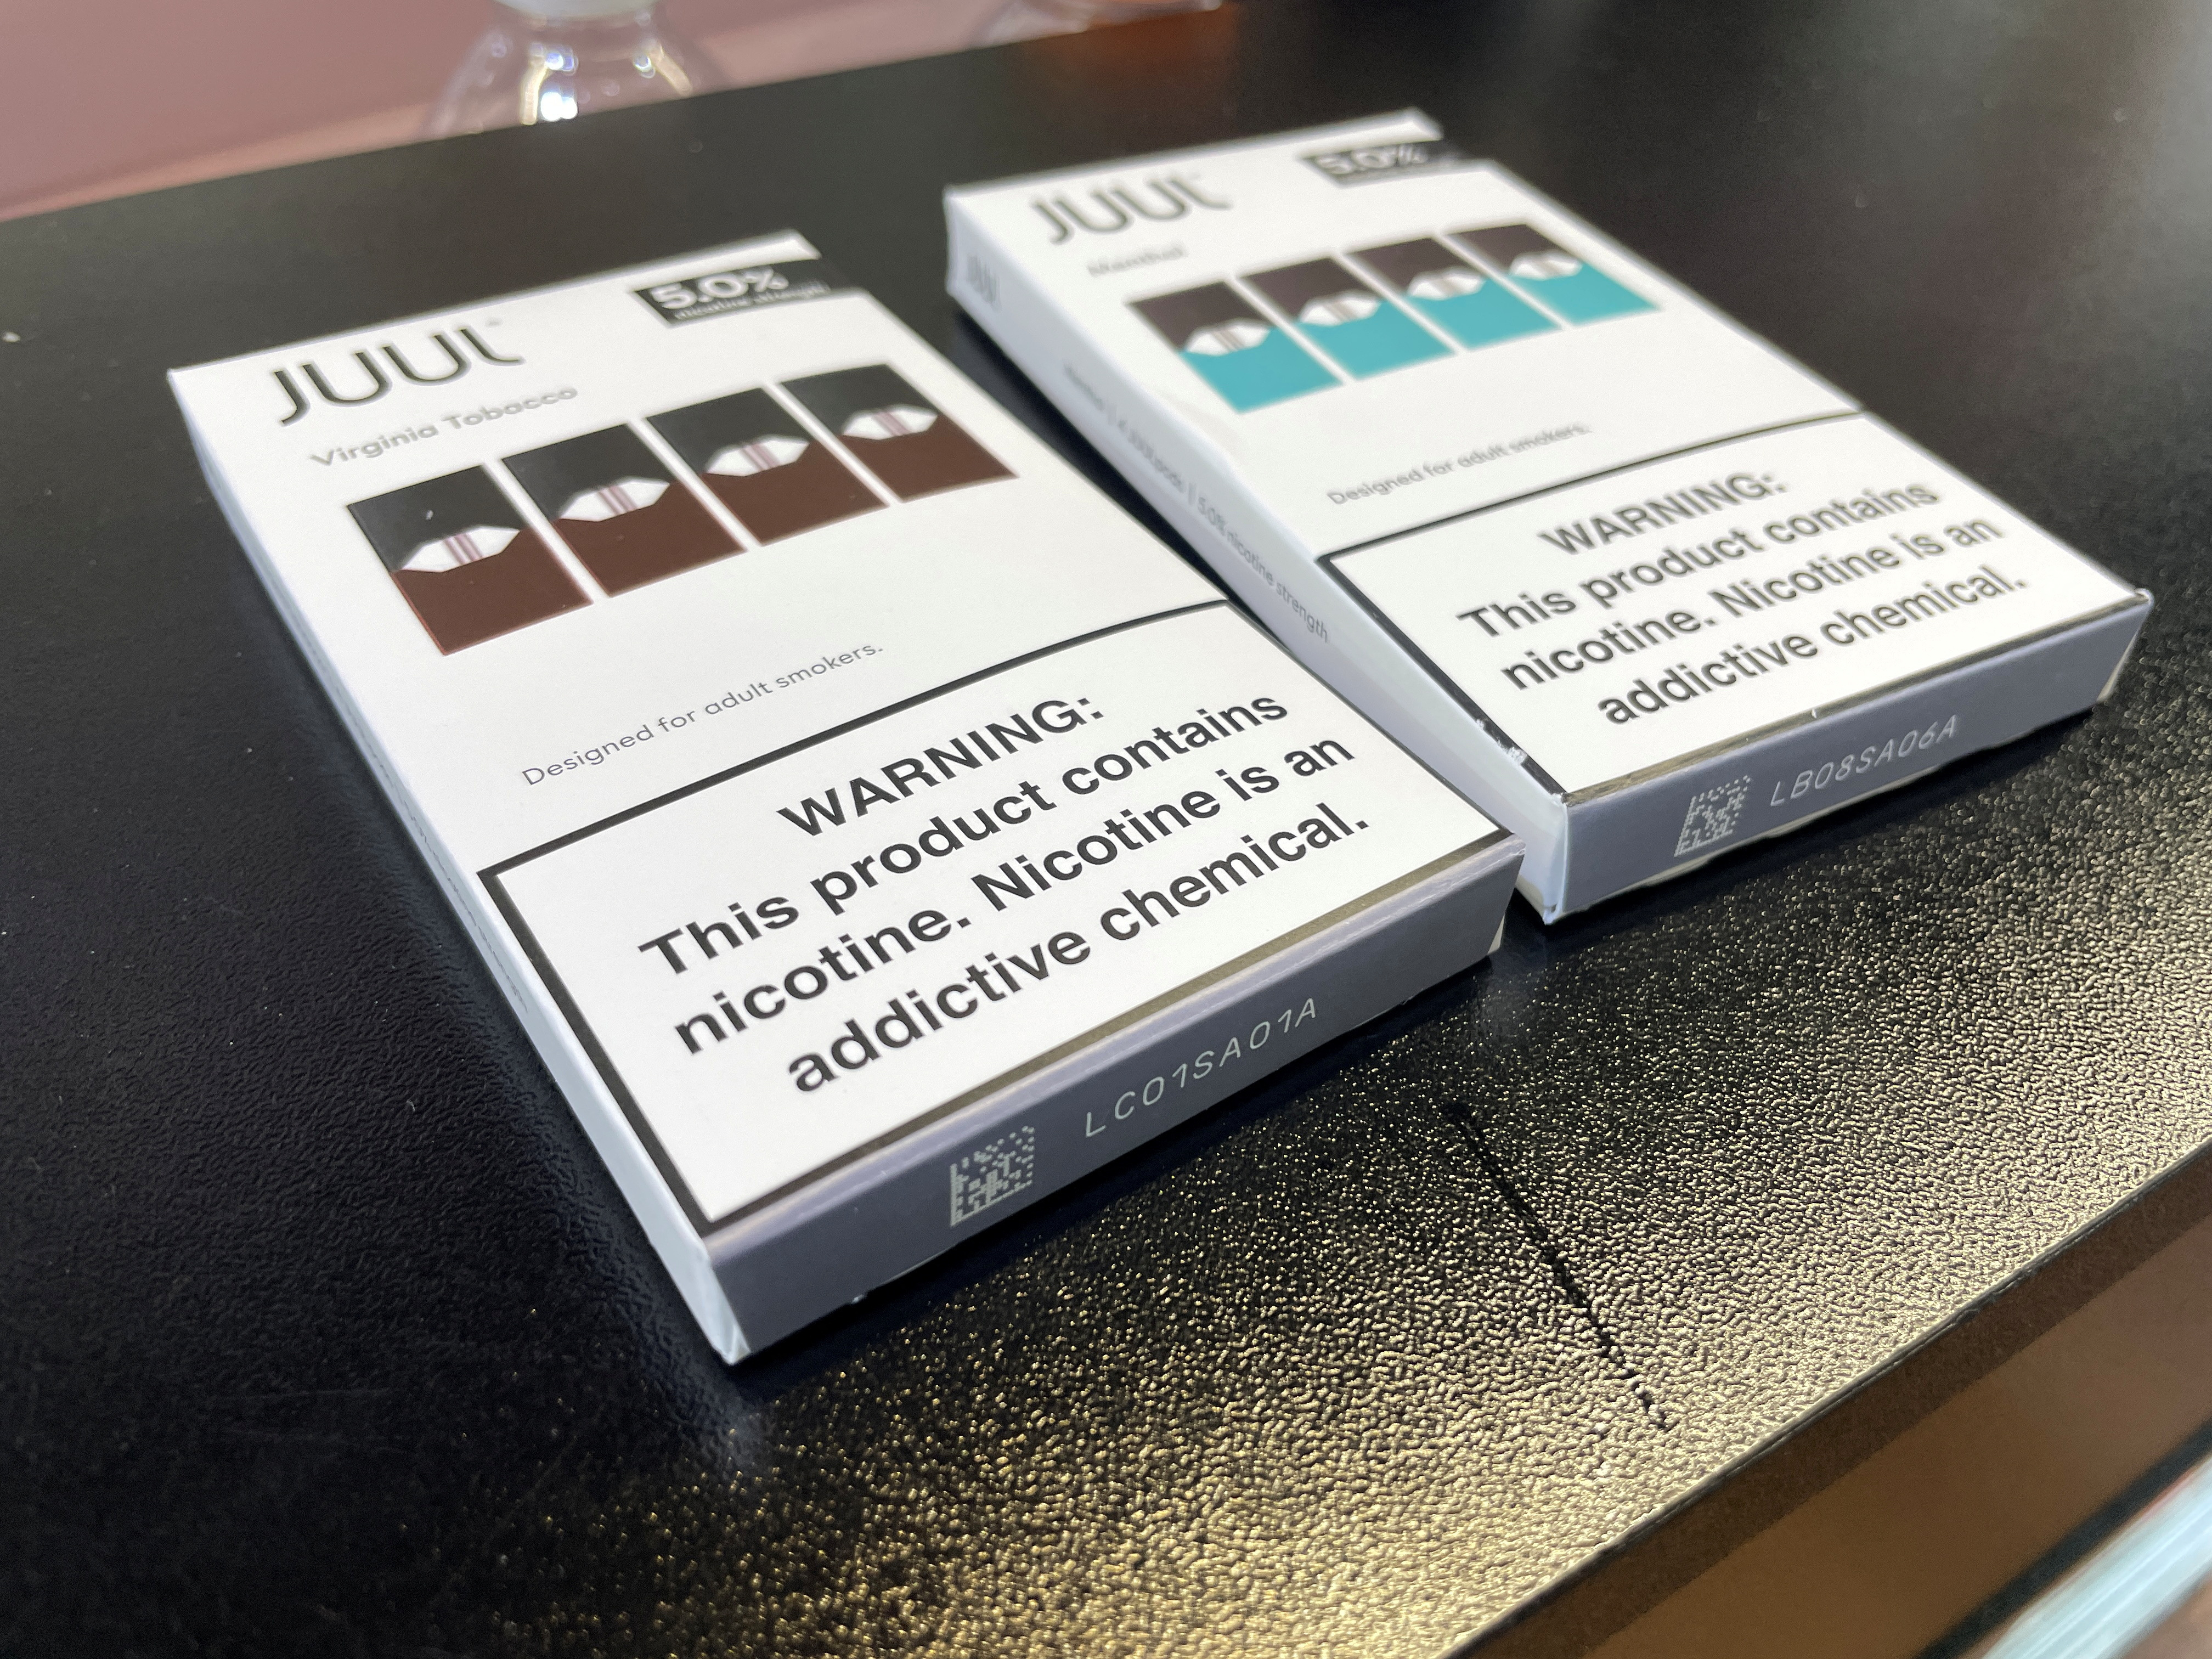 Juul agrees to pay $1.2 bln in youth-vaping settlement - Bloomberg News